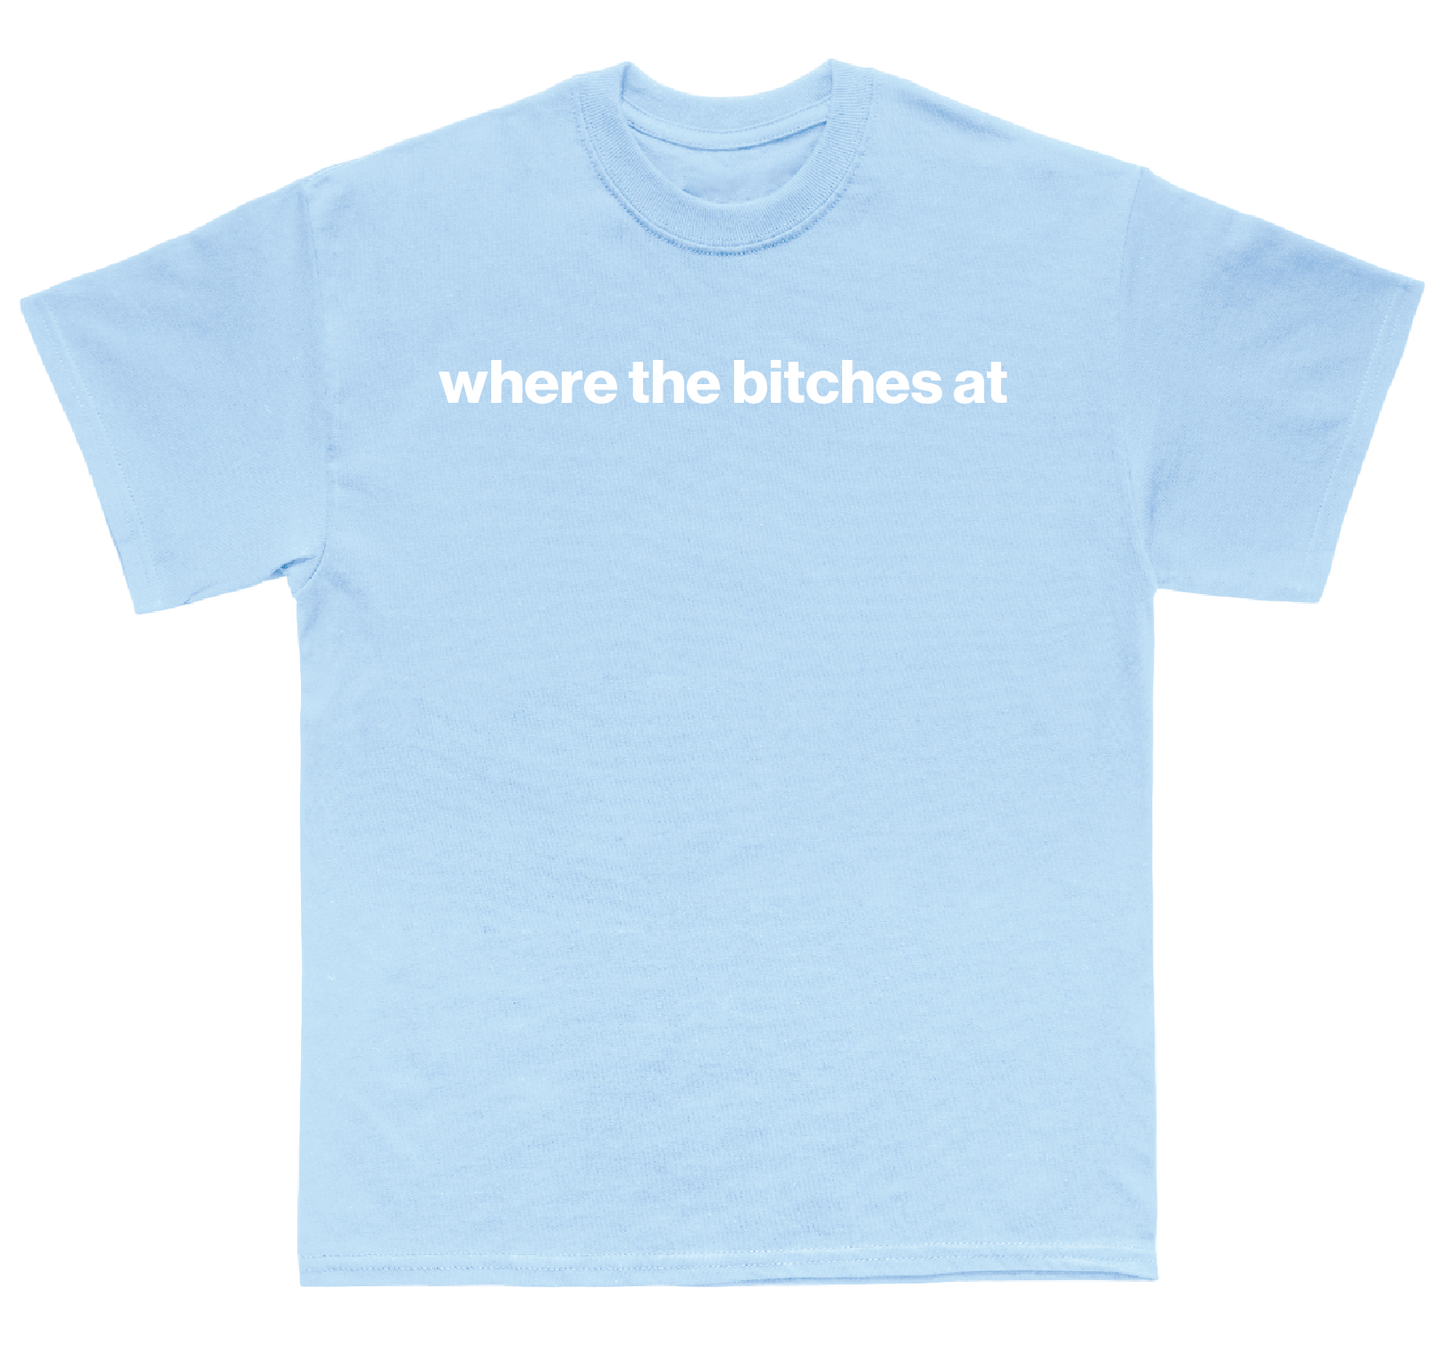 where the bitches at shirt